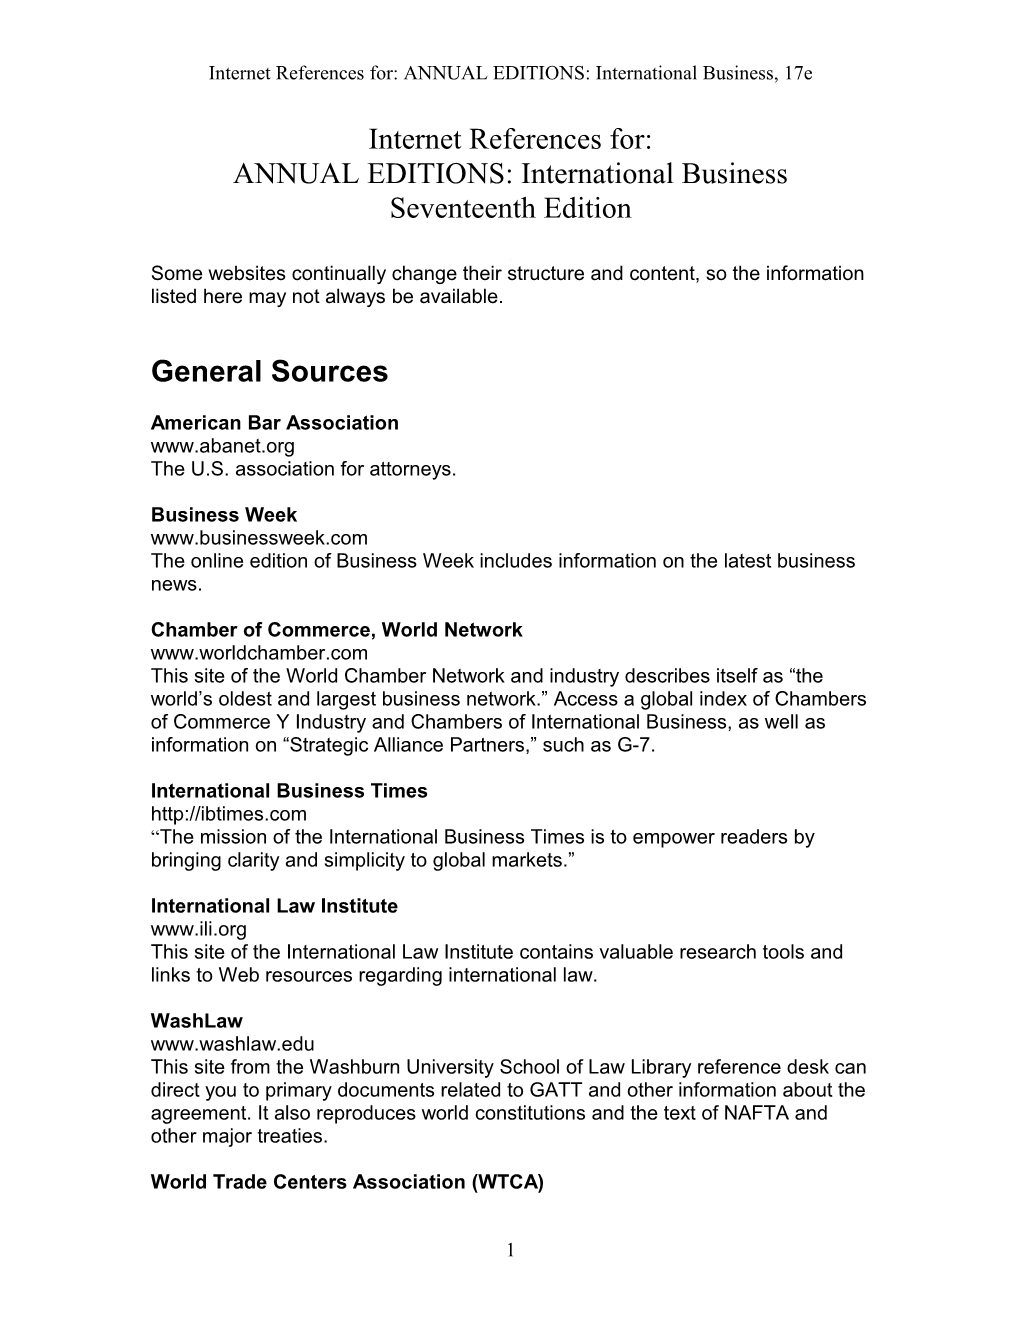 Internet References For: ANNUAL EDITIONS: International Business, 17E